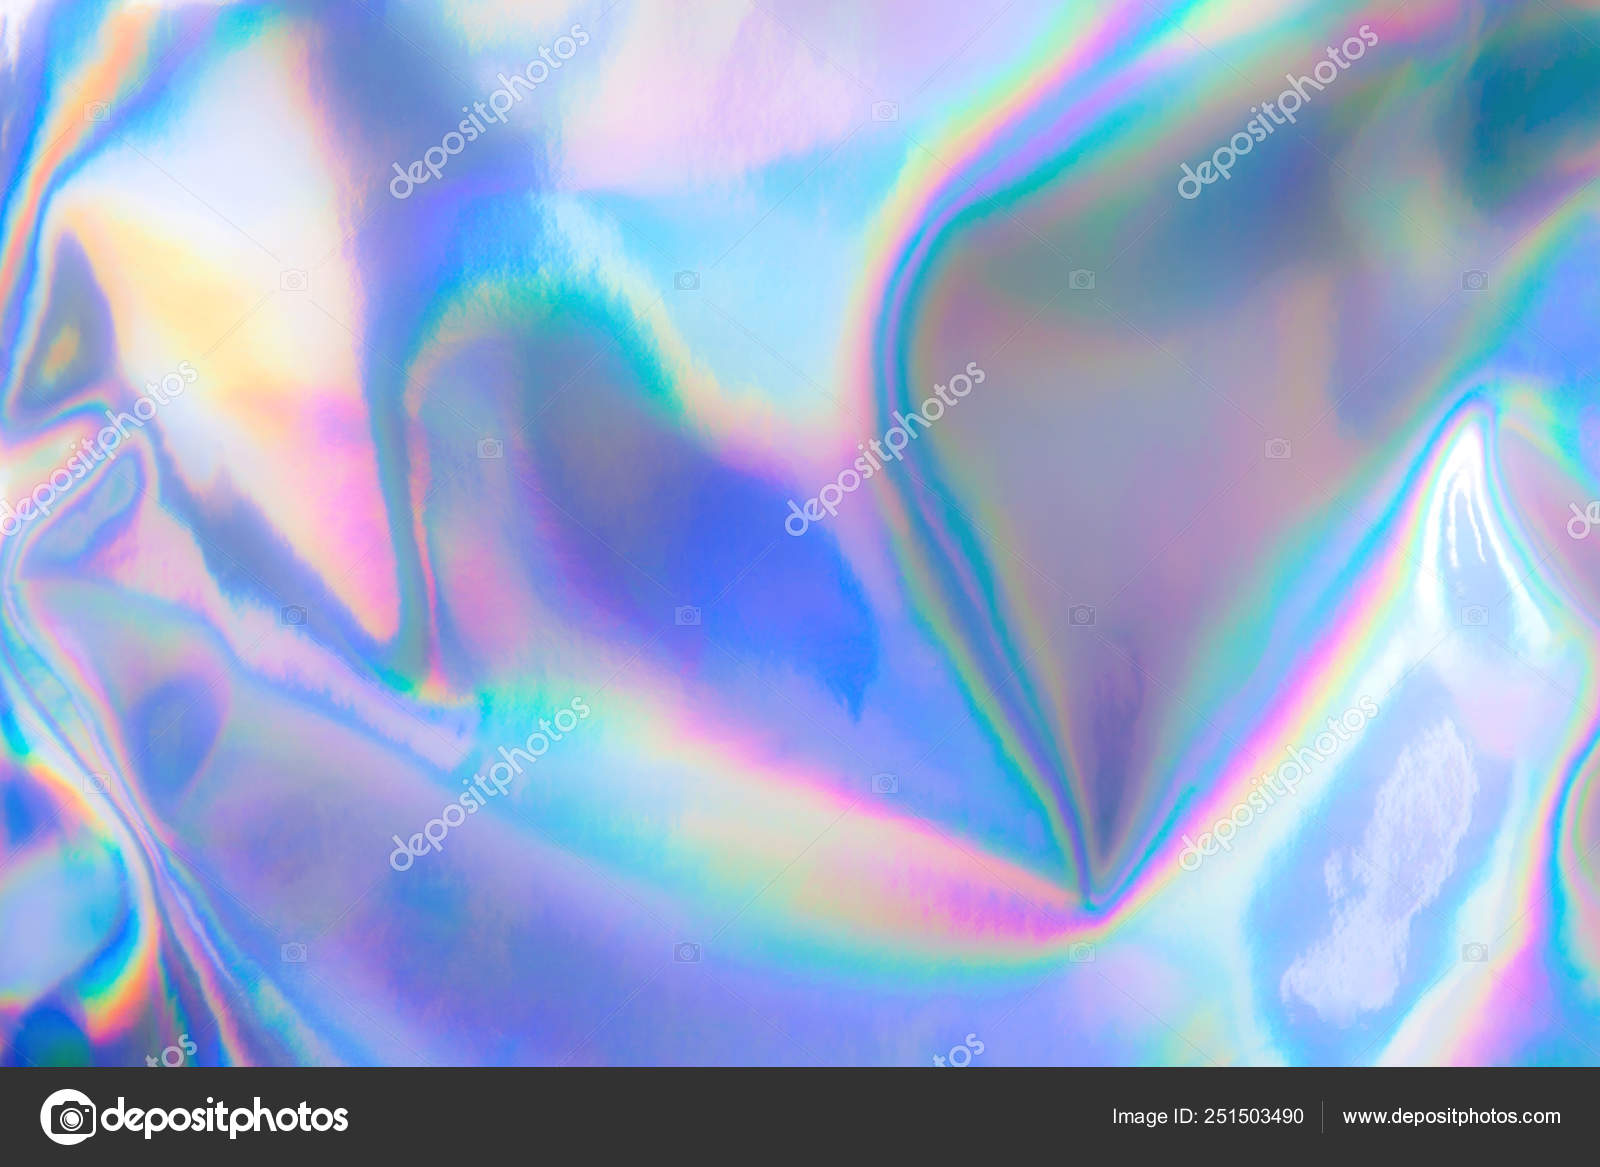 Download Pastel Colored Holographic Background Stock Photo Image By C Gadost 251503490